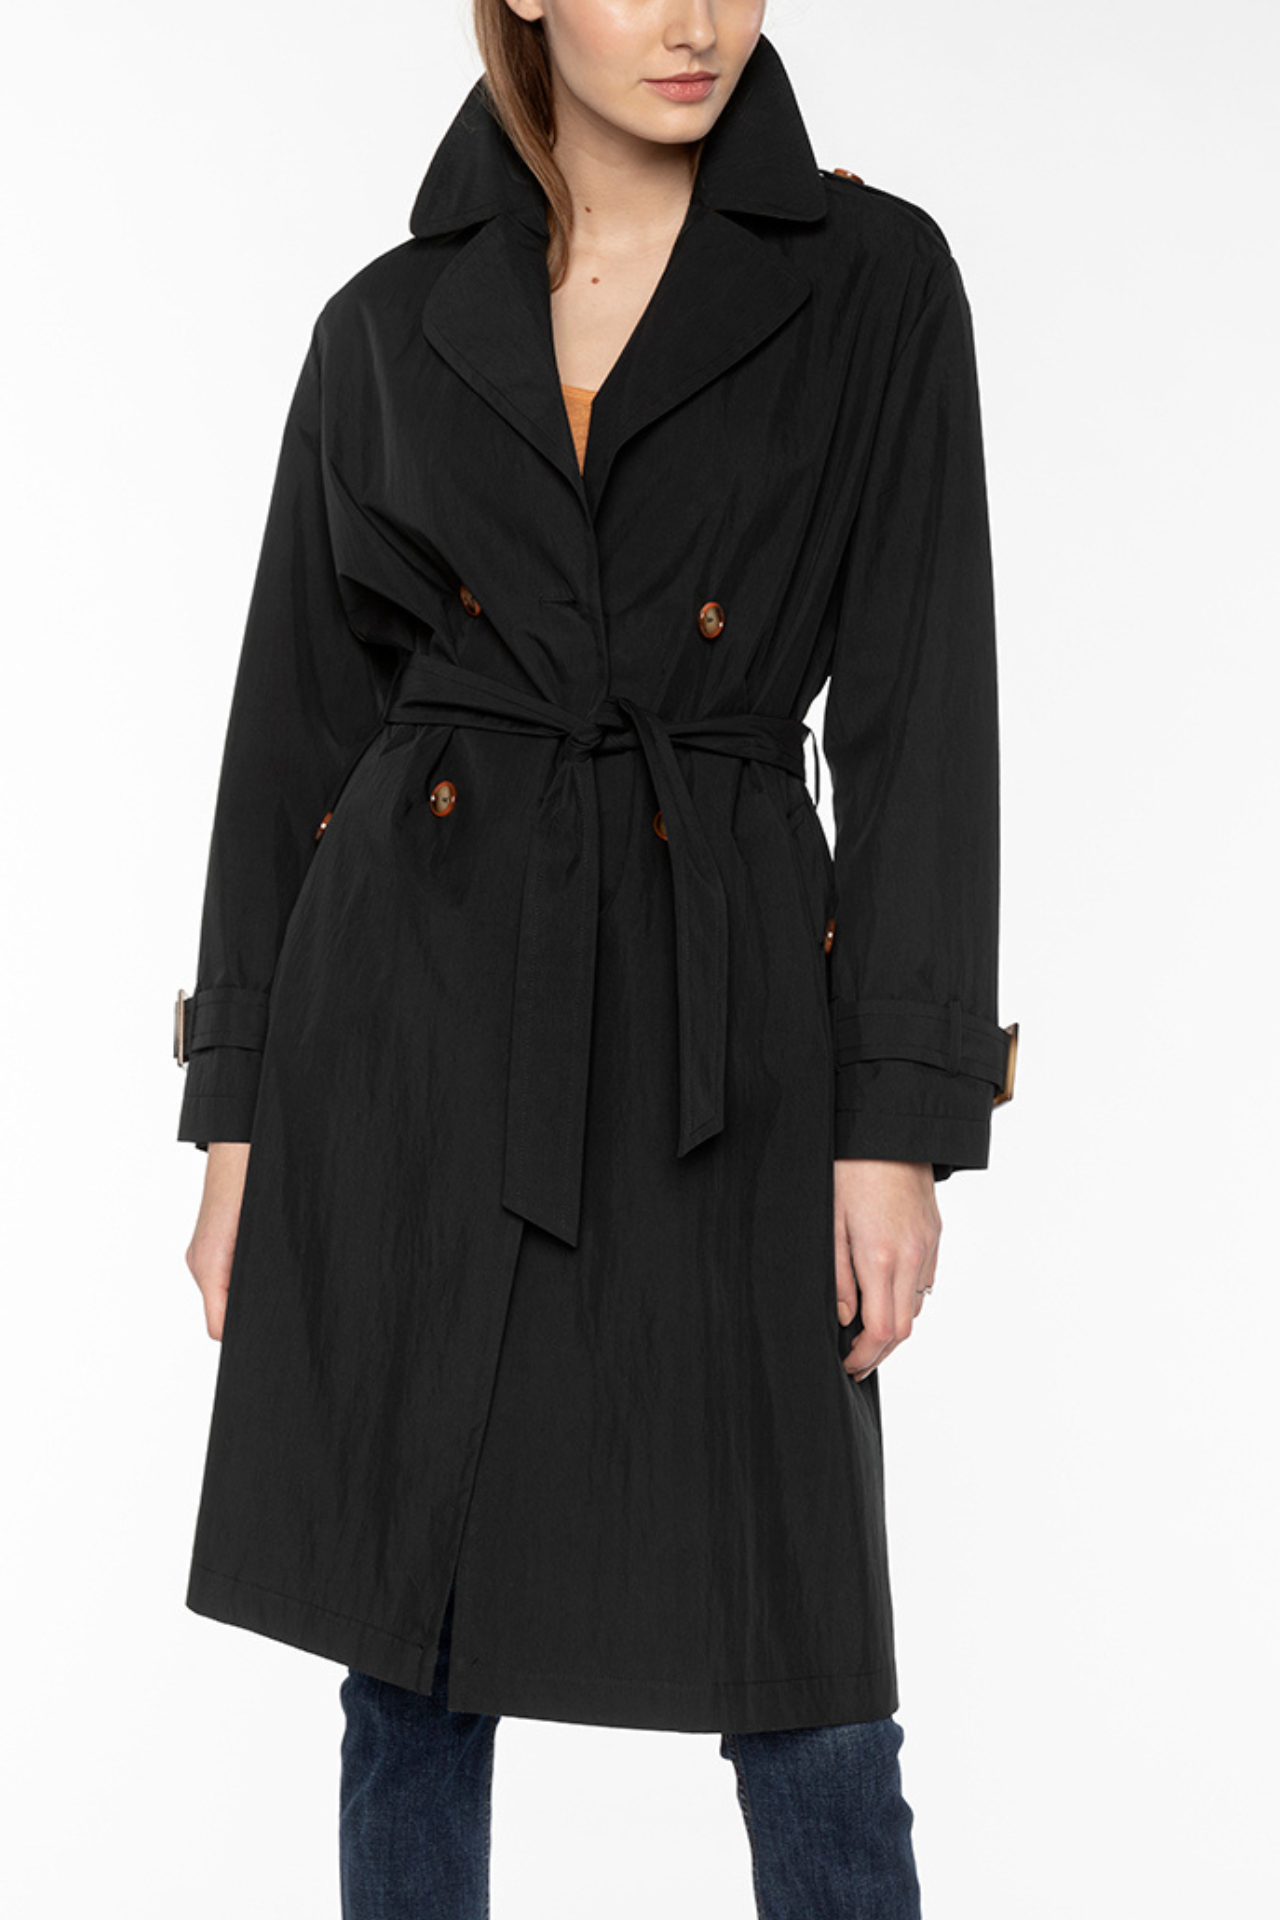 ALES Trench-Long and oversized black cotton trench coat